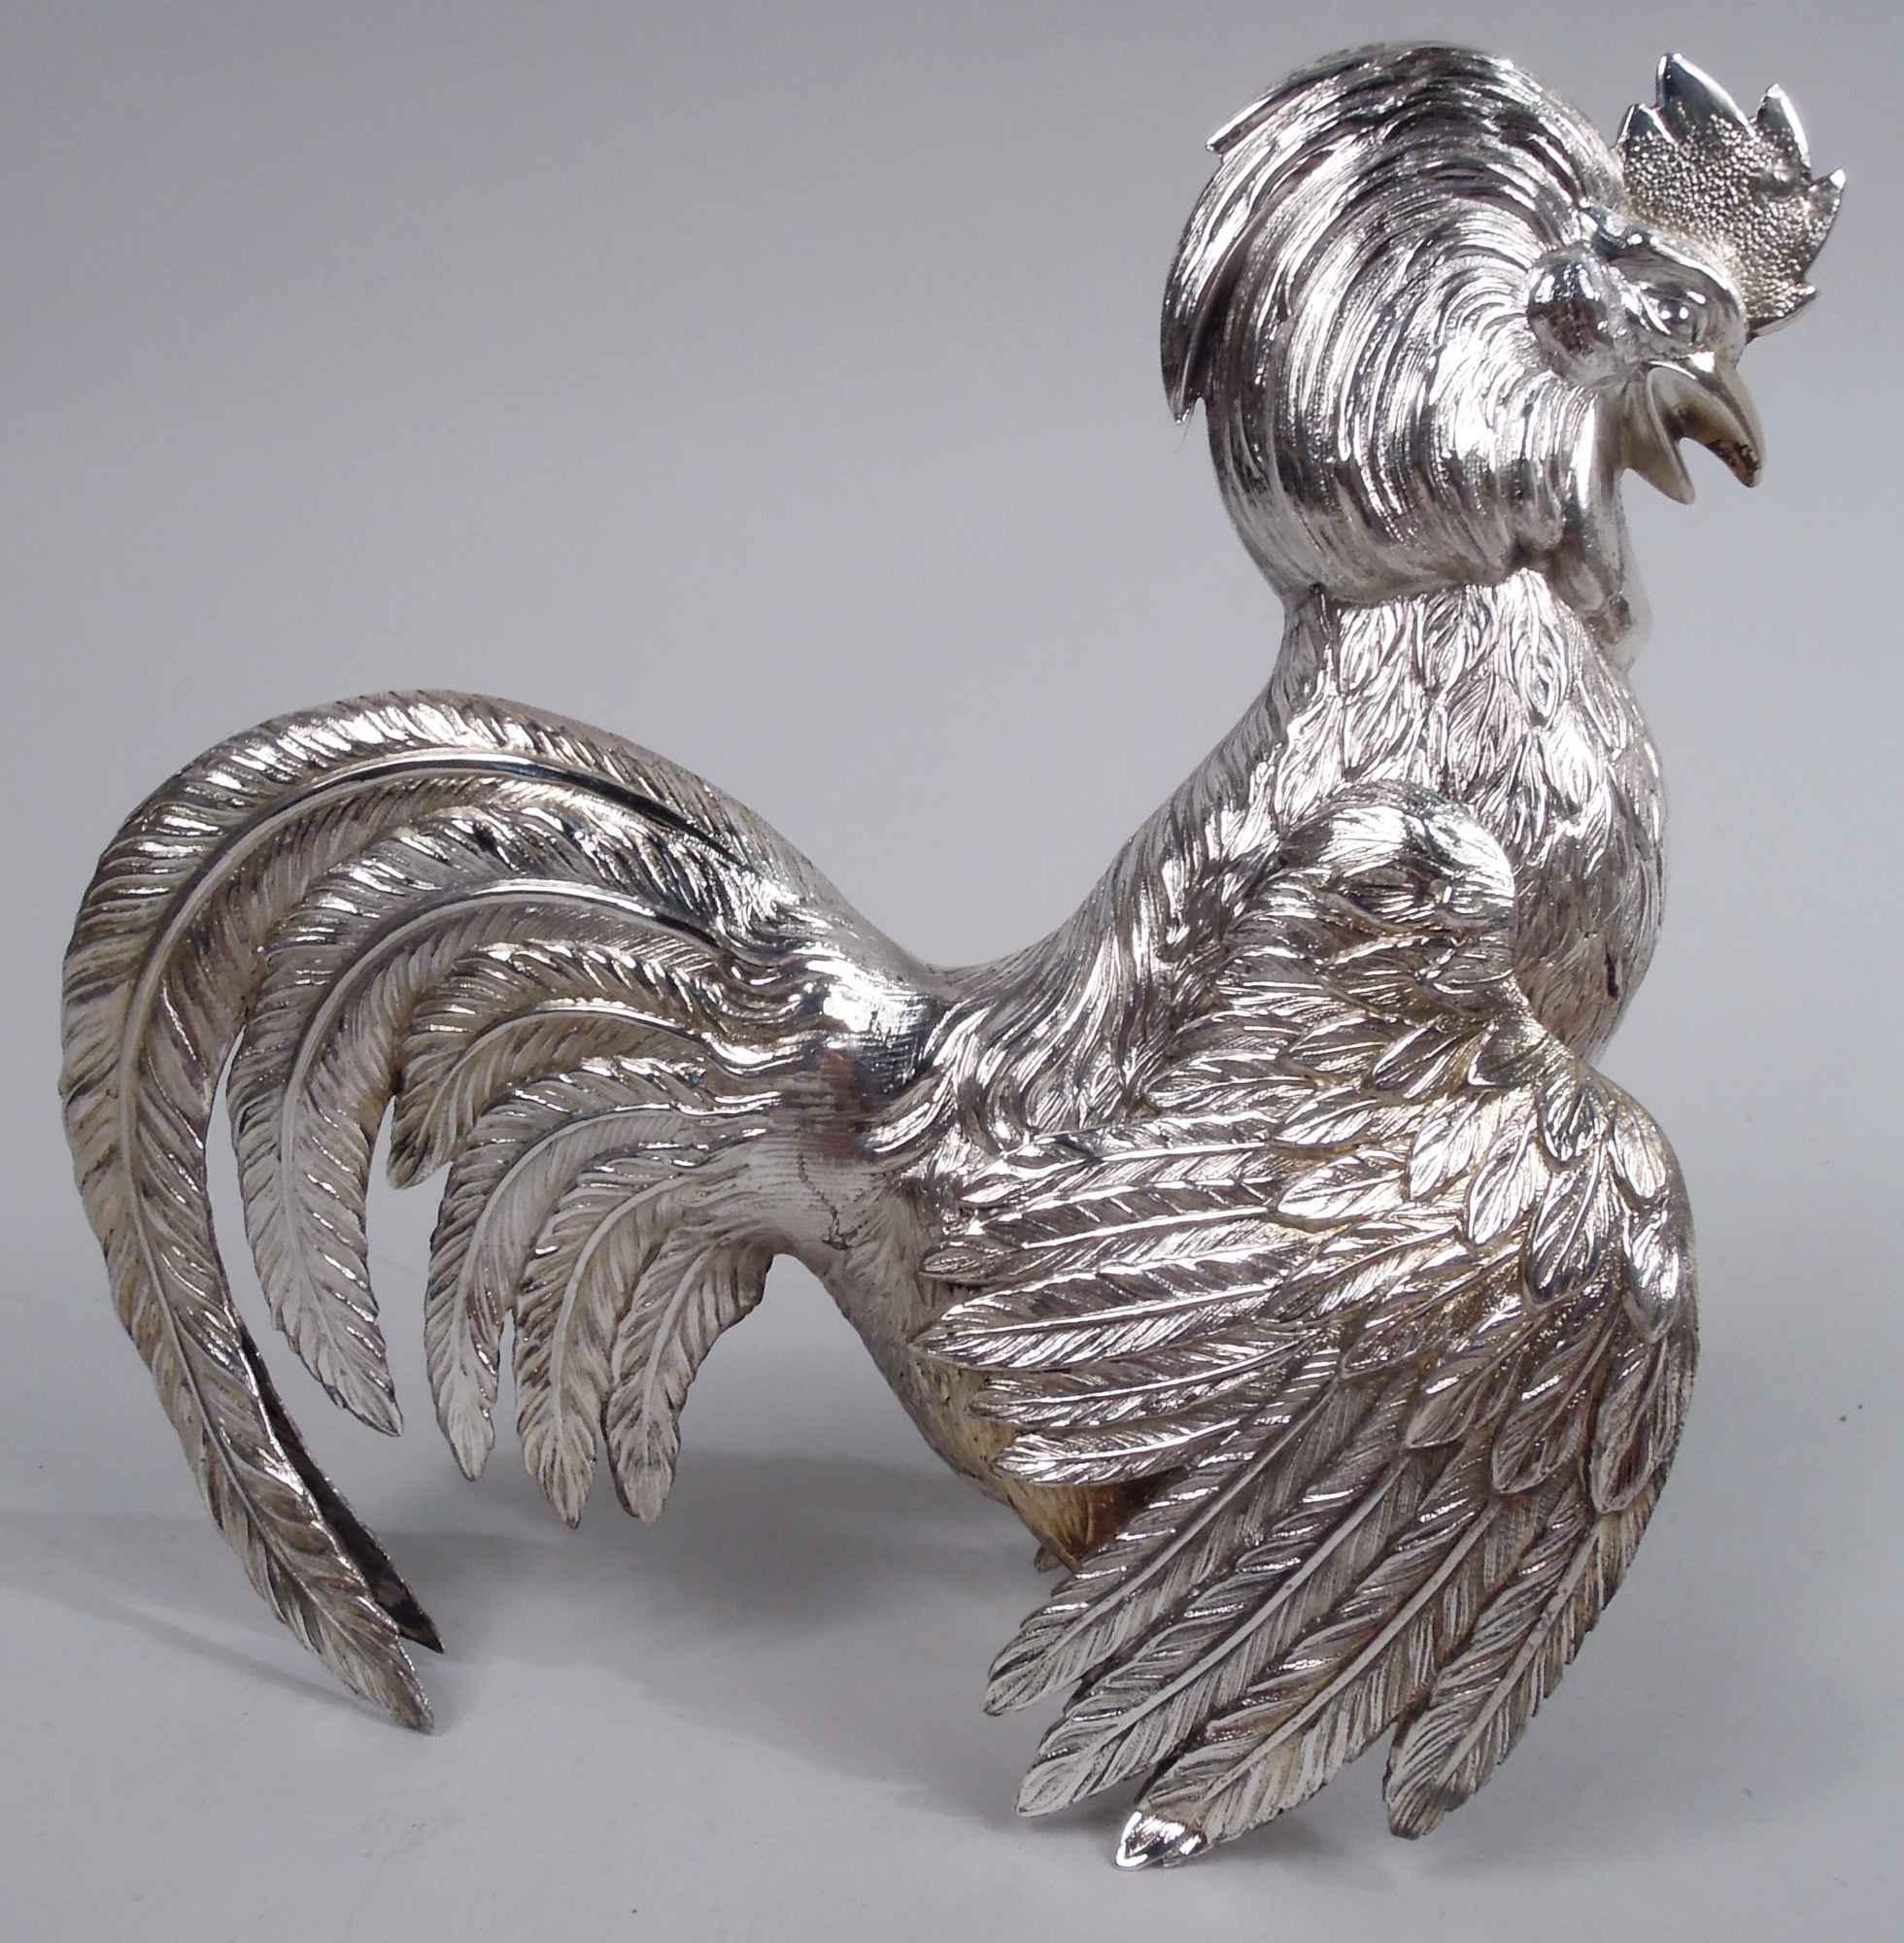 Pair of German silver birds, ca 1920. A rooster and hen with downturned wings and flamboyant flouncy tails. The rooster has a shaggy crown and raised talon and looks down while the hen, who has a small trim crown and scaly wattles, looks up. Cawing